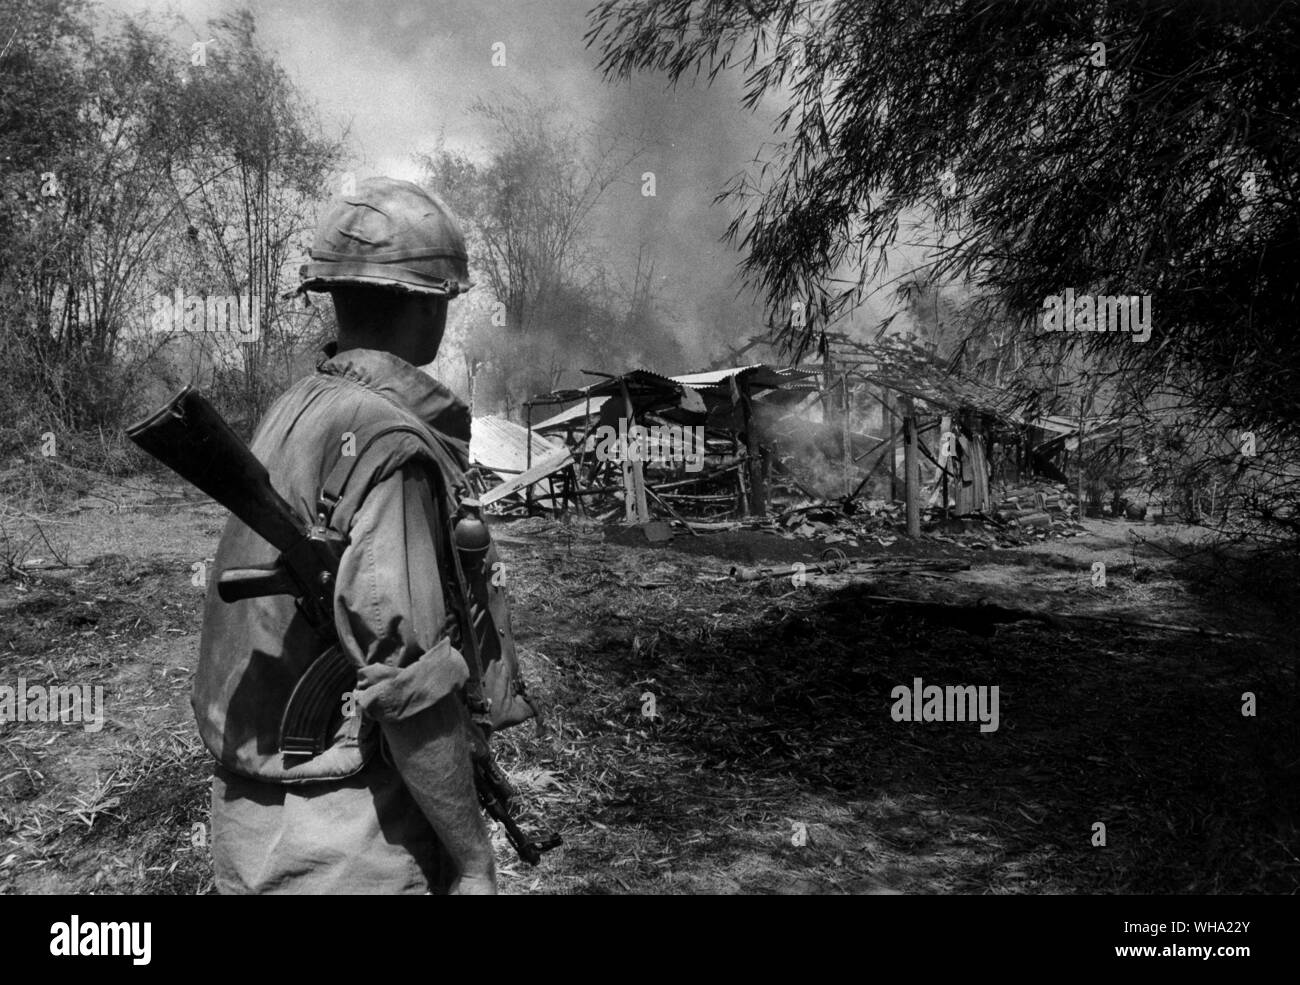 Vietnam war: An American soldier in front of the burning remains of one of the houses in Phu Lam. After the fires died down, he and one of his comrades were to go through the village to make sure no Viet Cong fighters were concealed in tunnels under the houses. 1968 Stock Photo